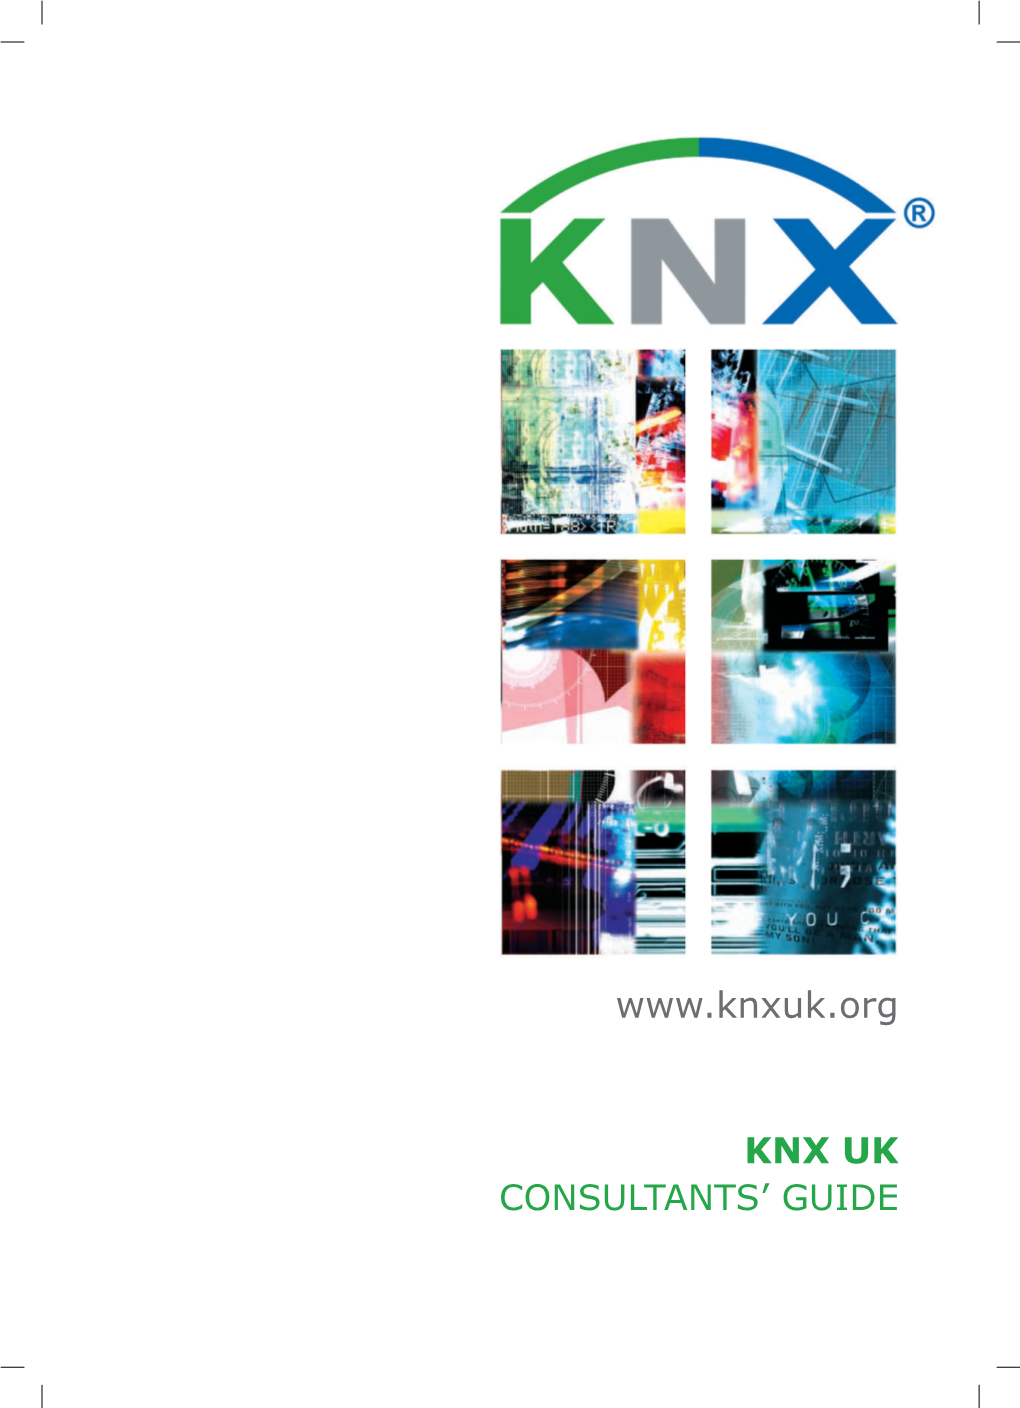 KNX Consultants Guide.Indd